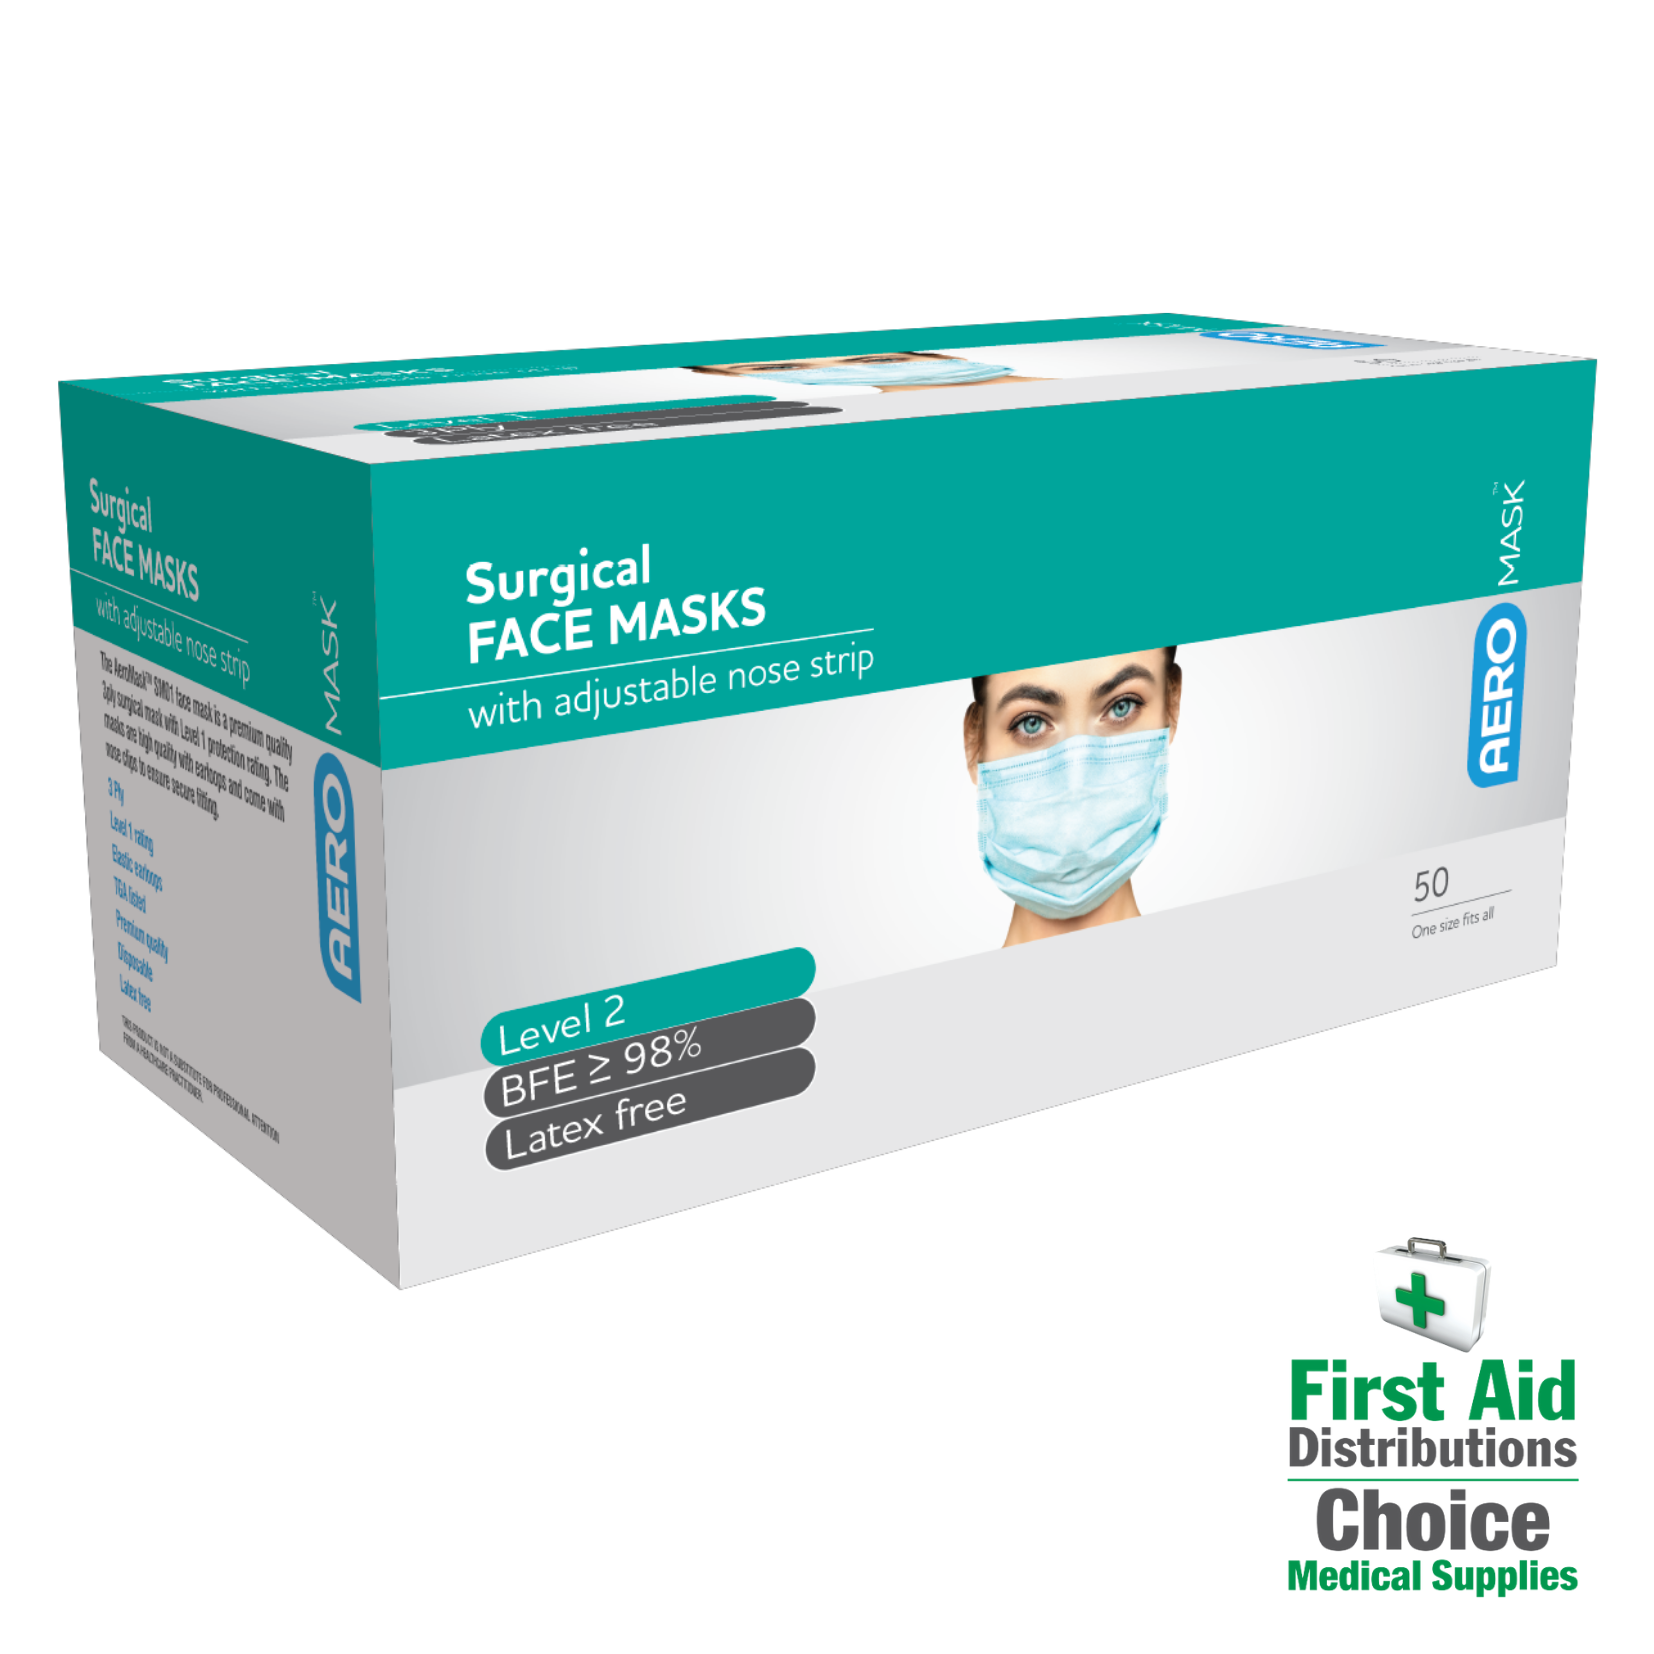 collections/Surgical_Mask_50_Pack_First_Aid_Distributions_0d9144ac-de88-49bf-910d-9d7a71d69804.png